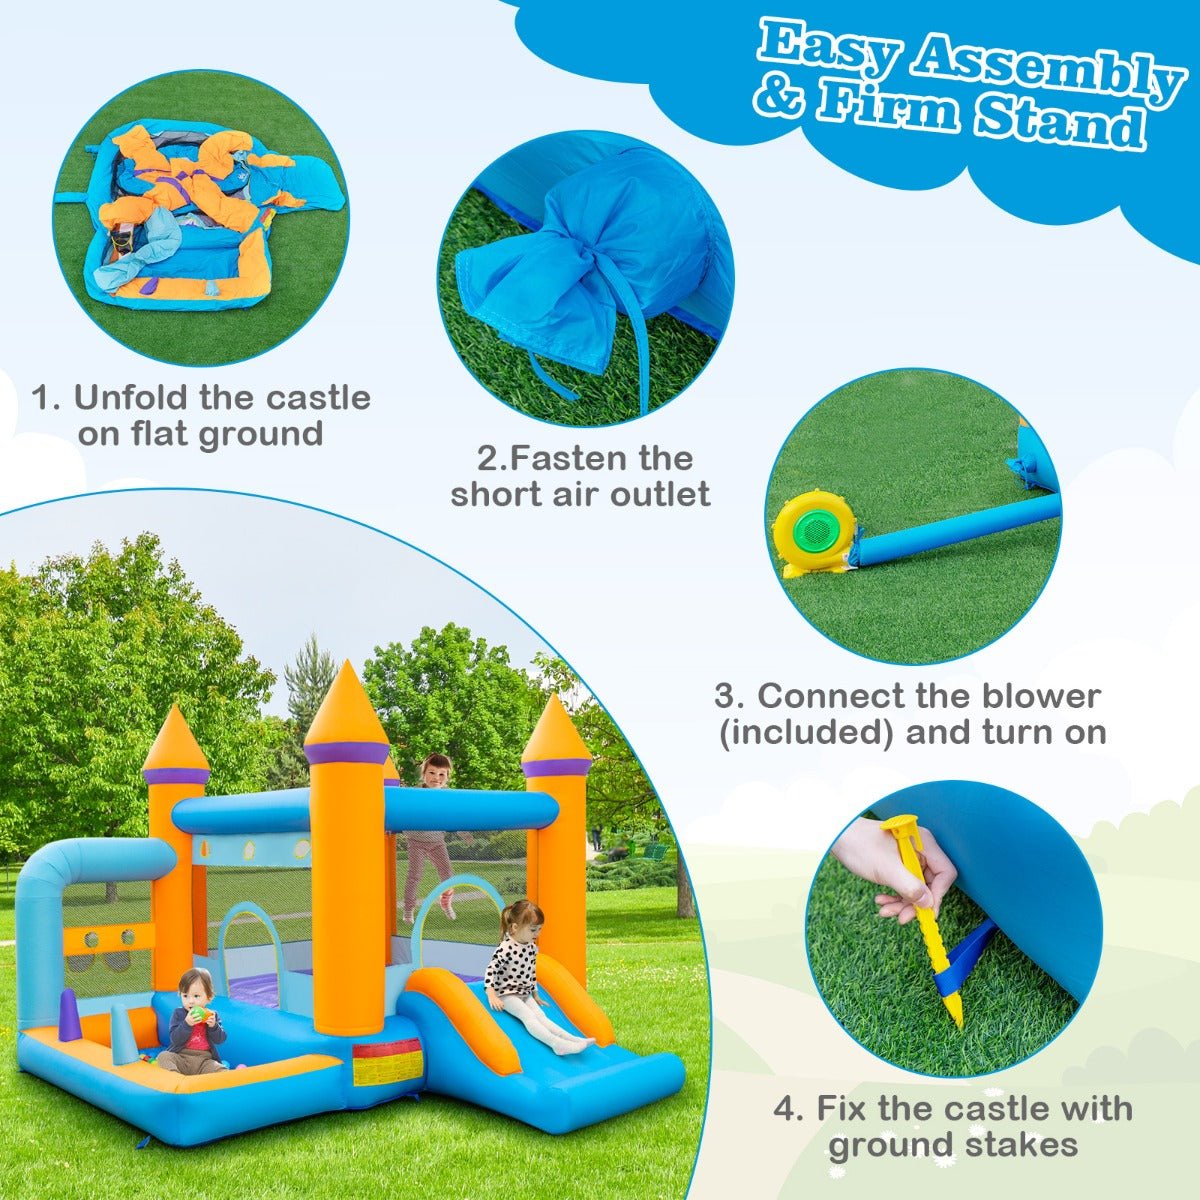 Bounce, Slide, and Play with the 5-in-1 Inflatable Castle